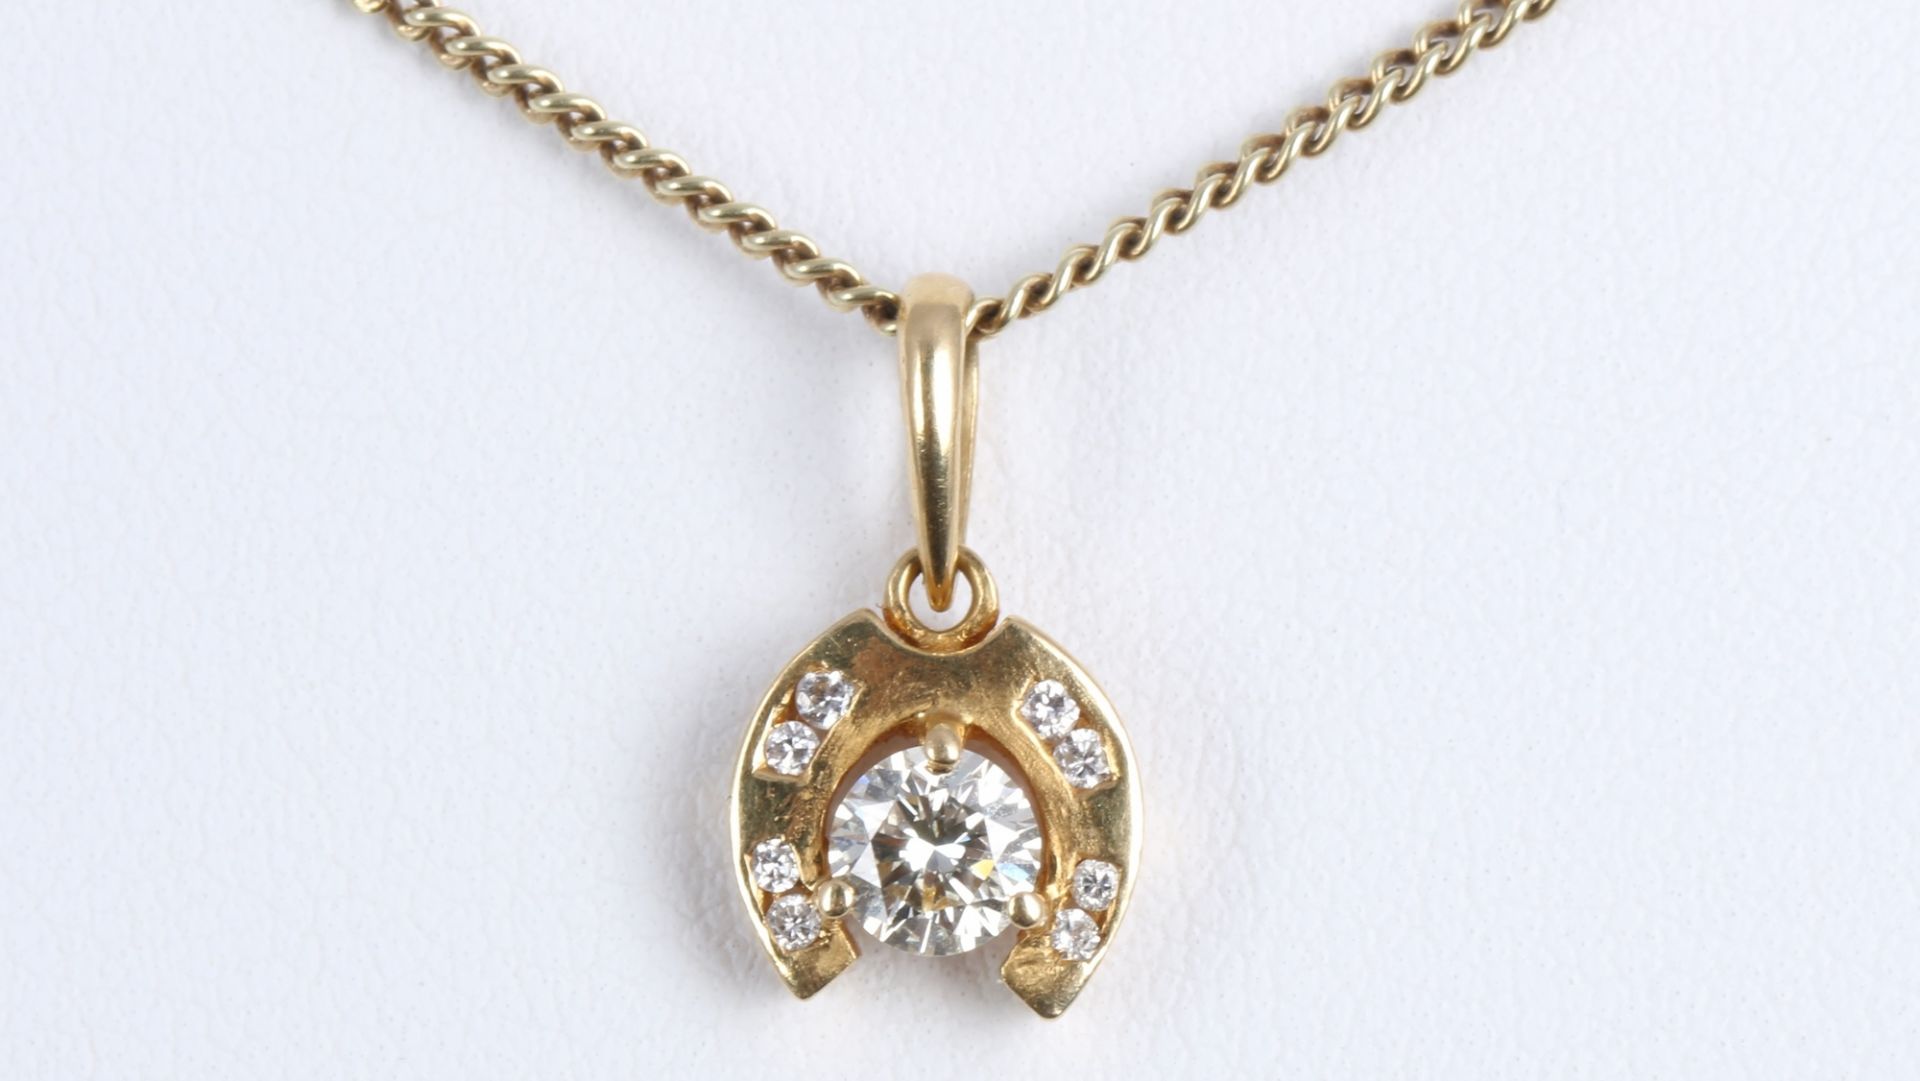 750 Gold Hufeisenanhänger Brillant 0.25ct an 585 Gold Kette, 18K diamond pendant with 14K necklace,